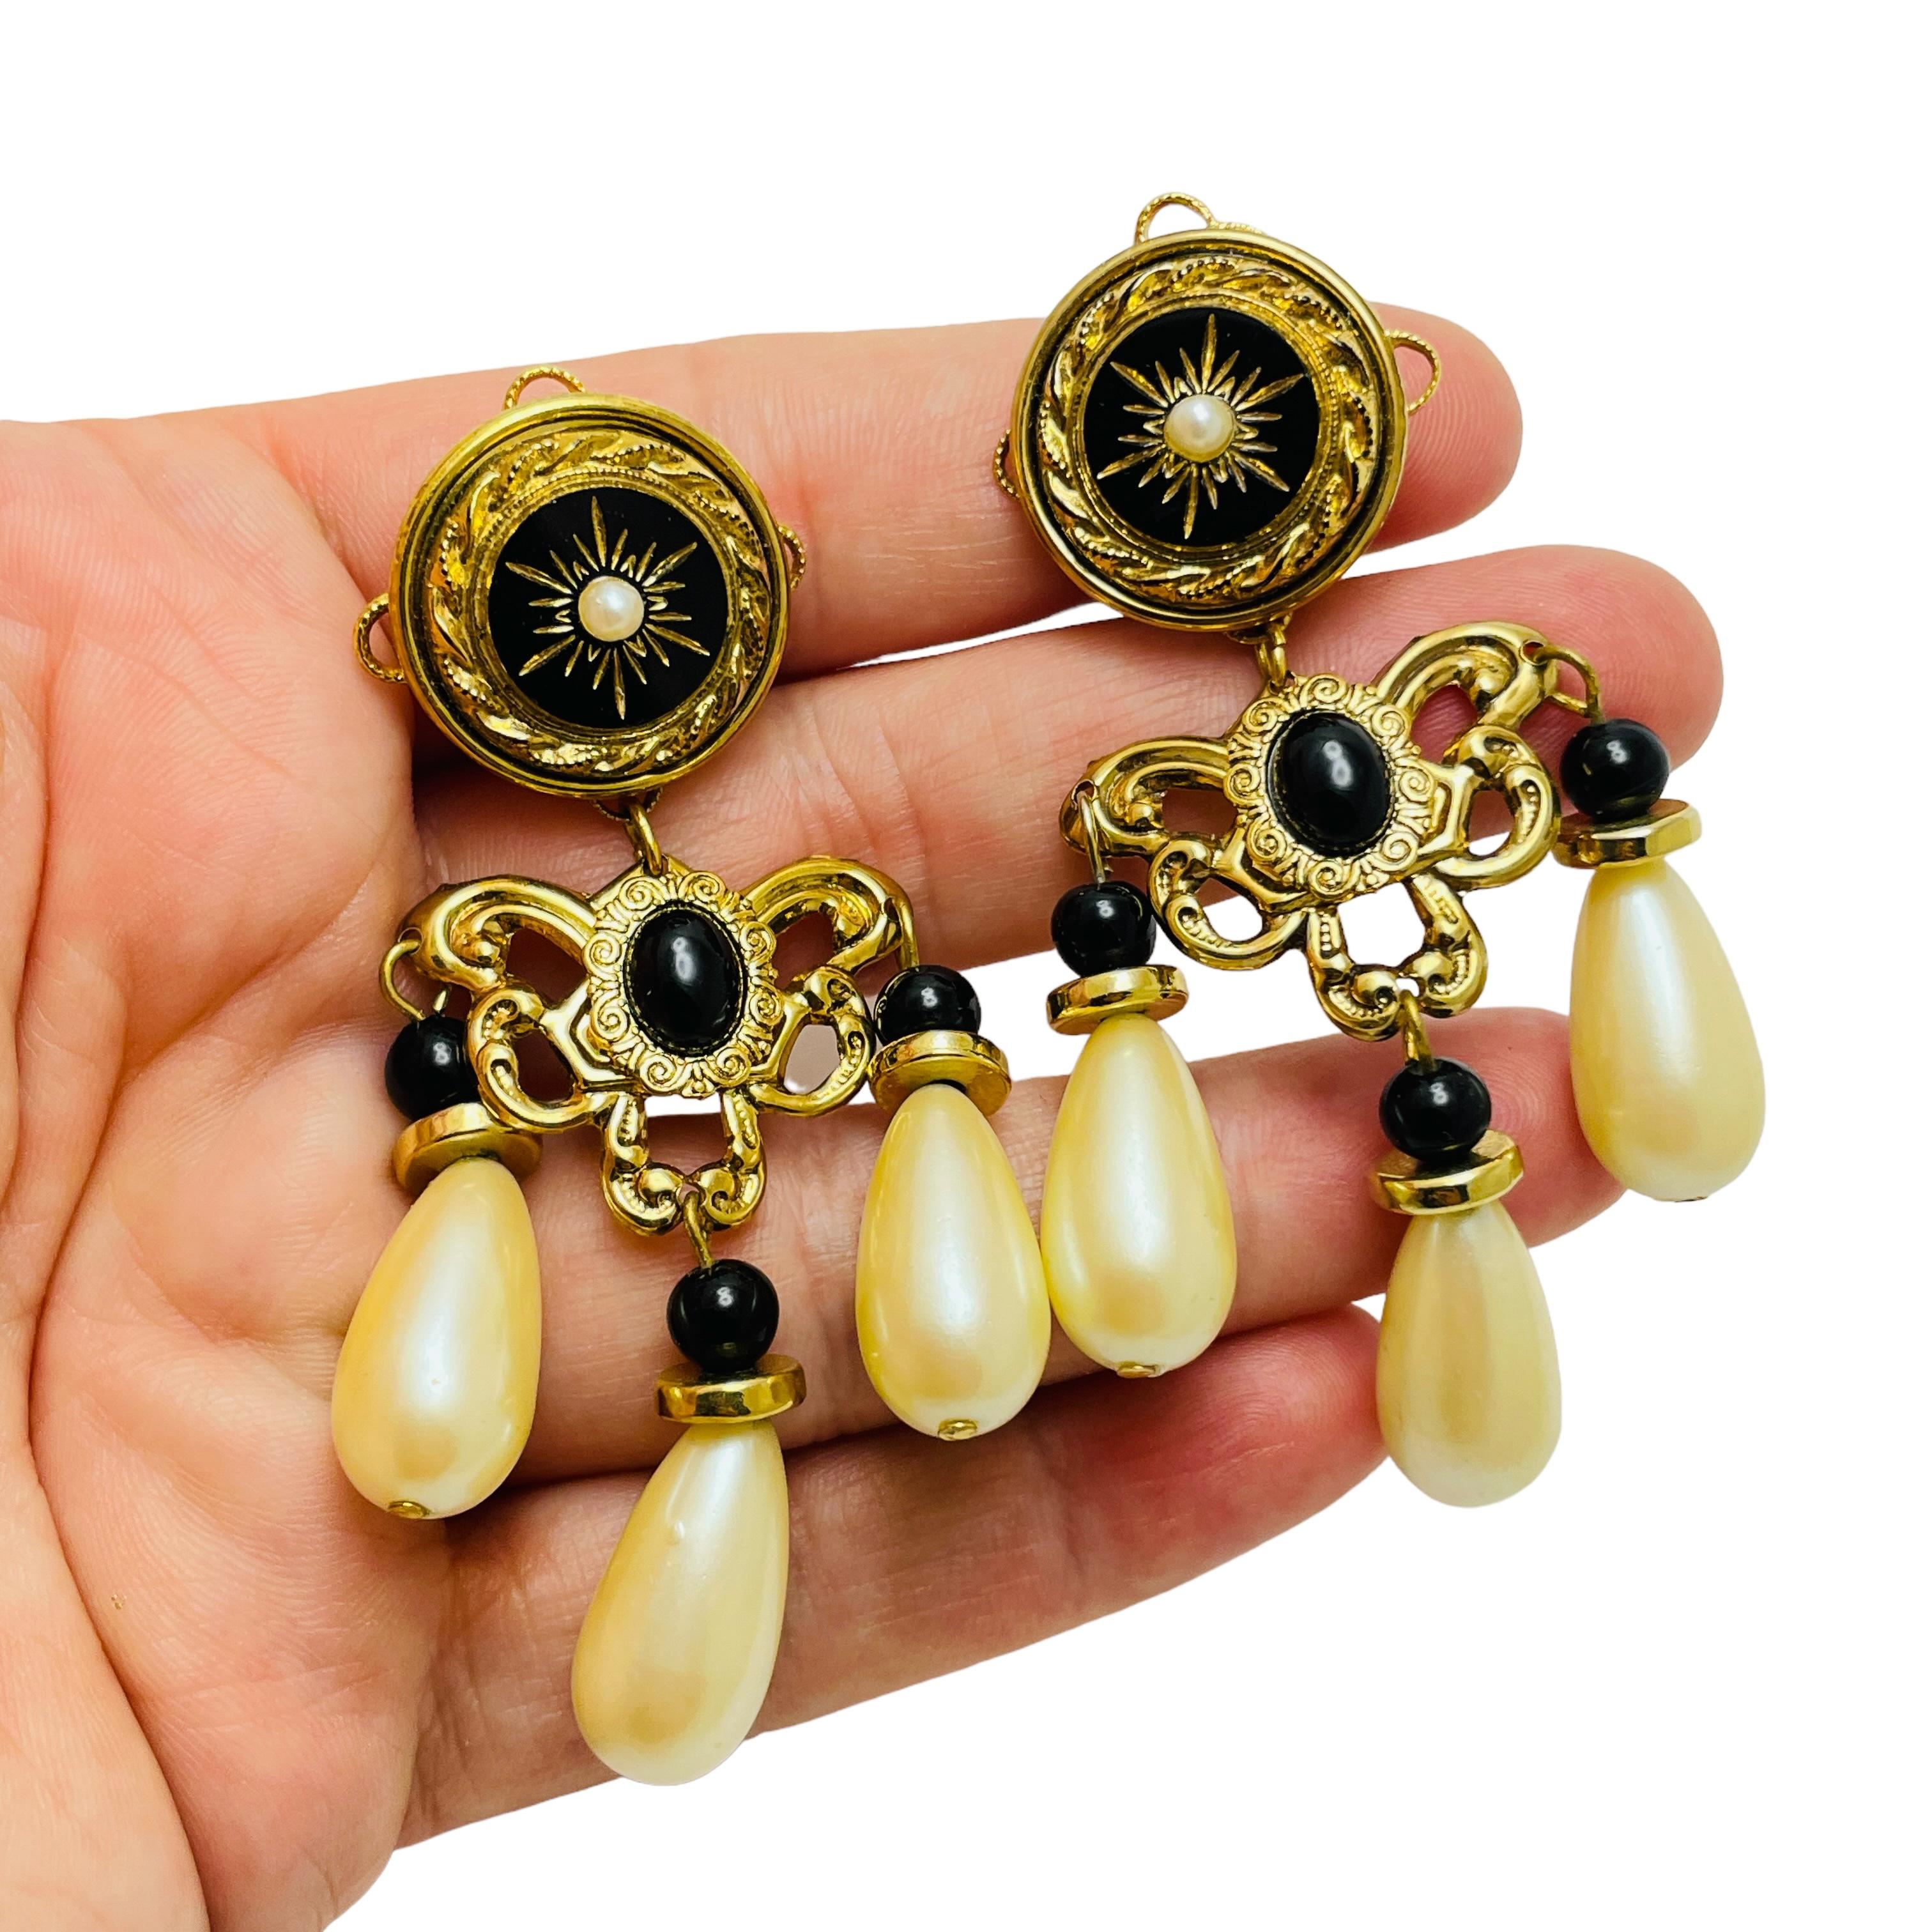 DETAILS

• unsigned

• gold tone with faux pearls

• vintage designer runway earrings

MEASUREMENTS

• 

CONDITION

• excellent vintage condition with minimal signs of wear

❤️❤️ VINTAGE DESIGNER JEWELRY ❤️❤️
❤️❤️ ALEXANDER'S BOUTIQUE ❤️❤️